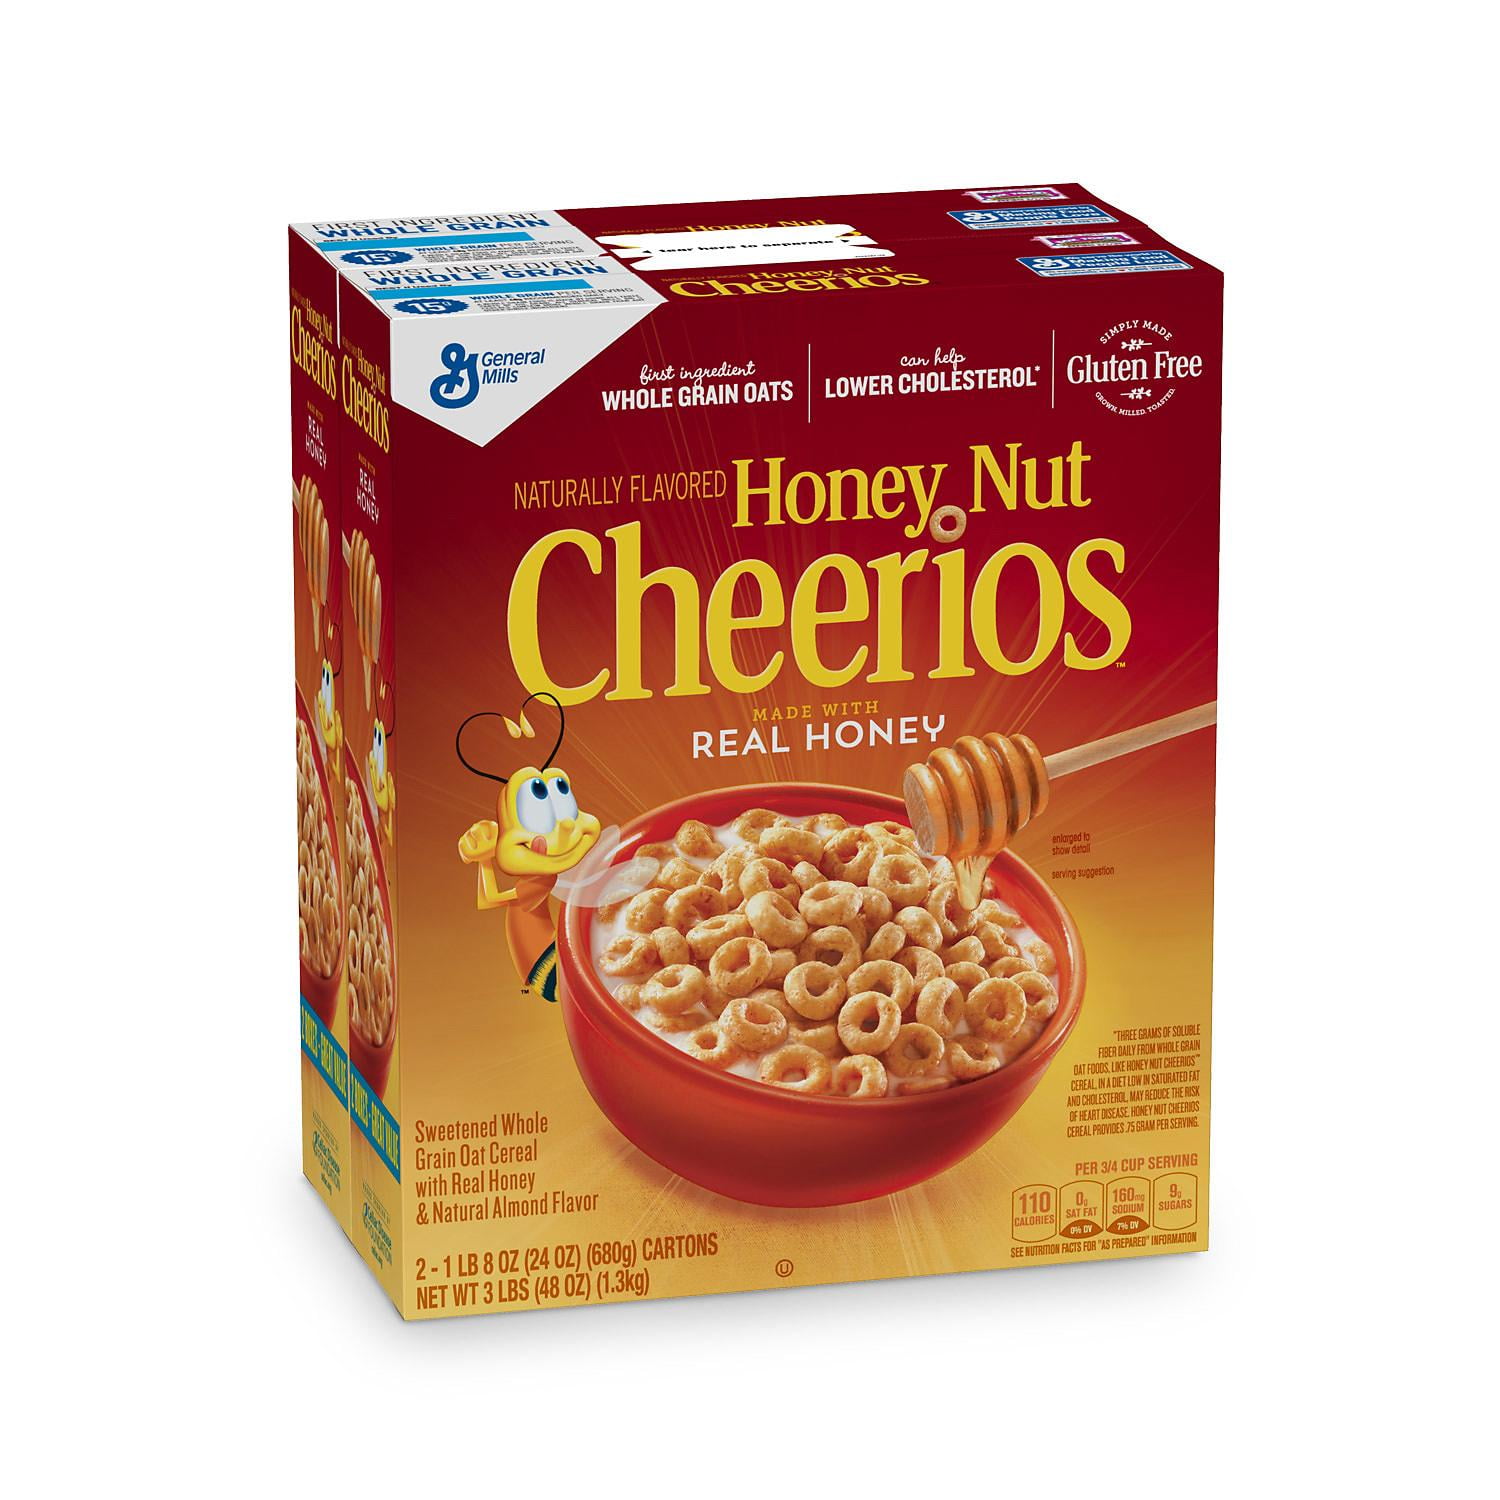 Honey Nut Cheerios Gluten-Free Cereal Pack of 2, 24oz Each 